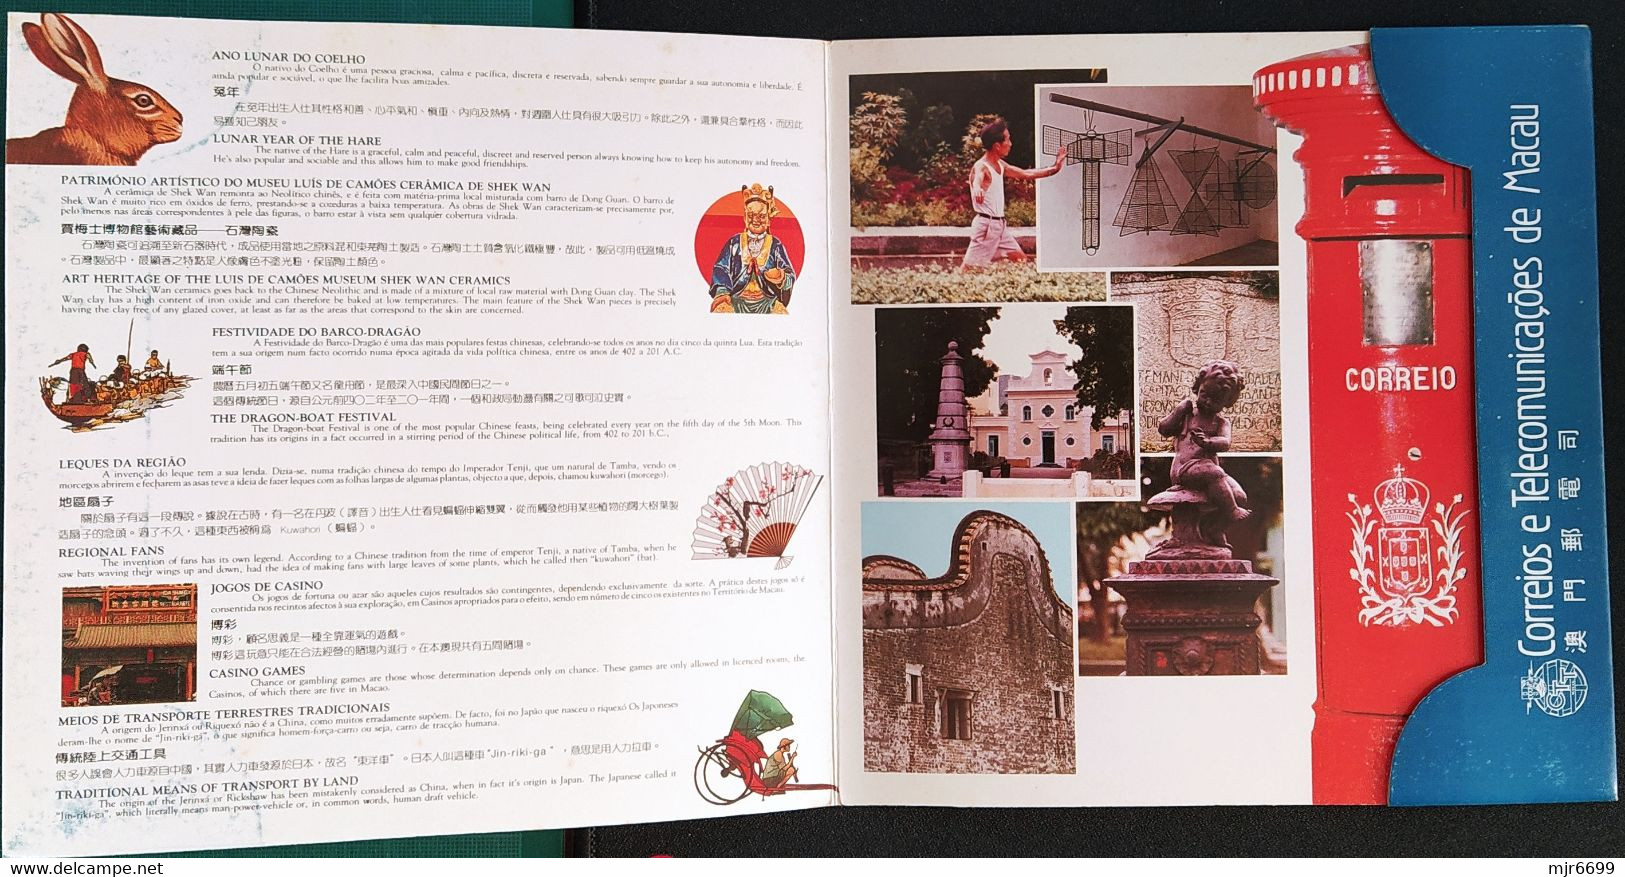 MACAU - 1987 YEAR BOOK WITH ALL STAMPS+FANS\S+RABBITBOOKLET, CAT$420 EUROS +++ - Años Completos